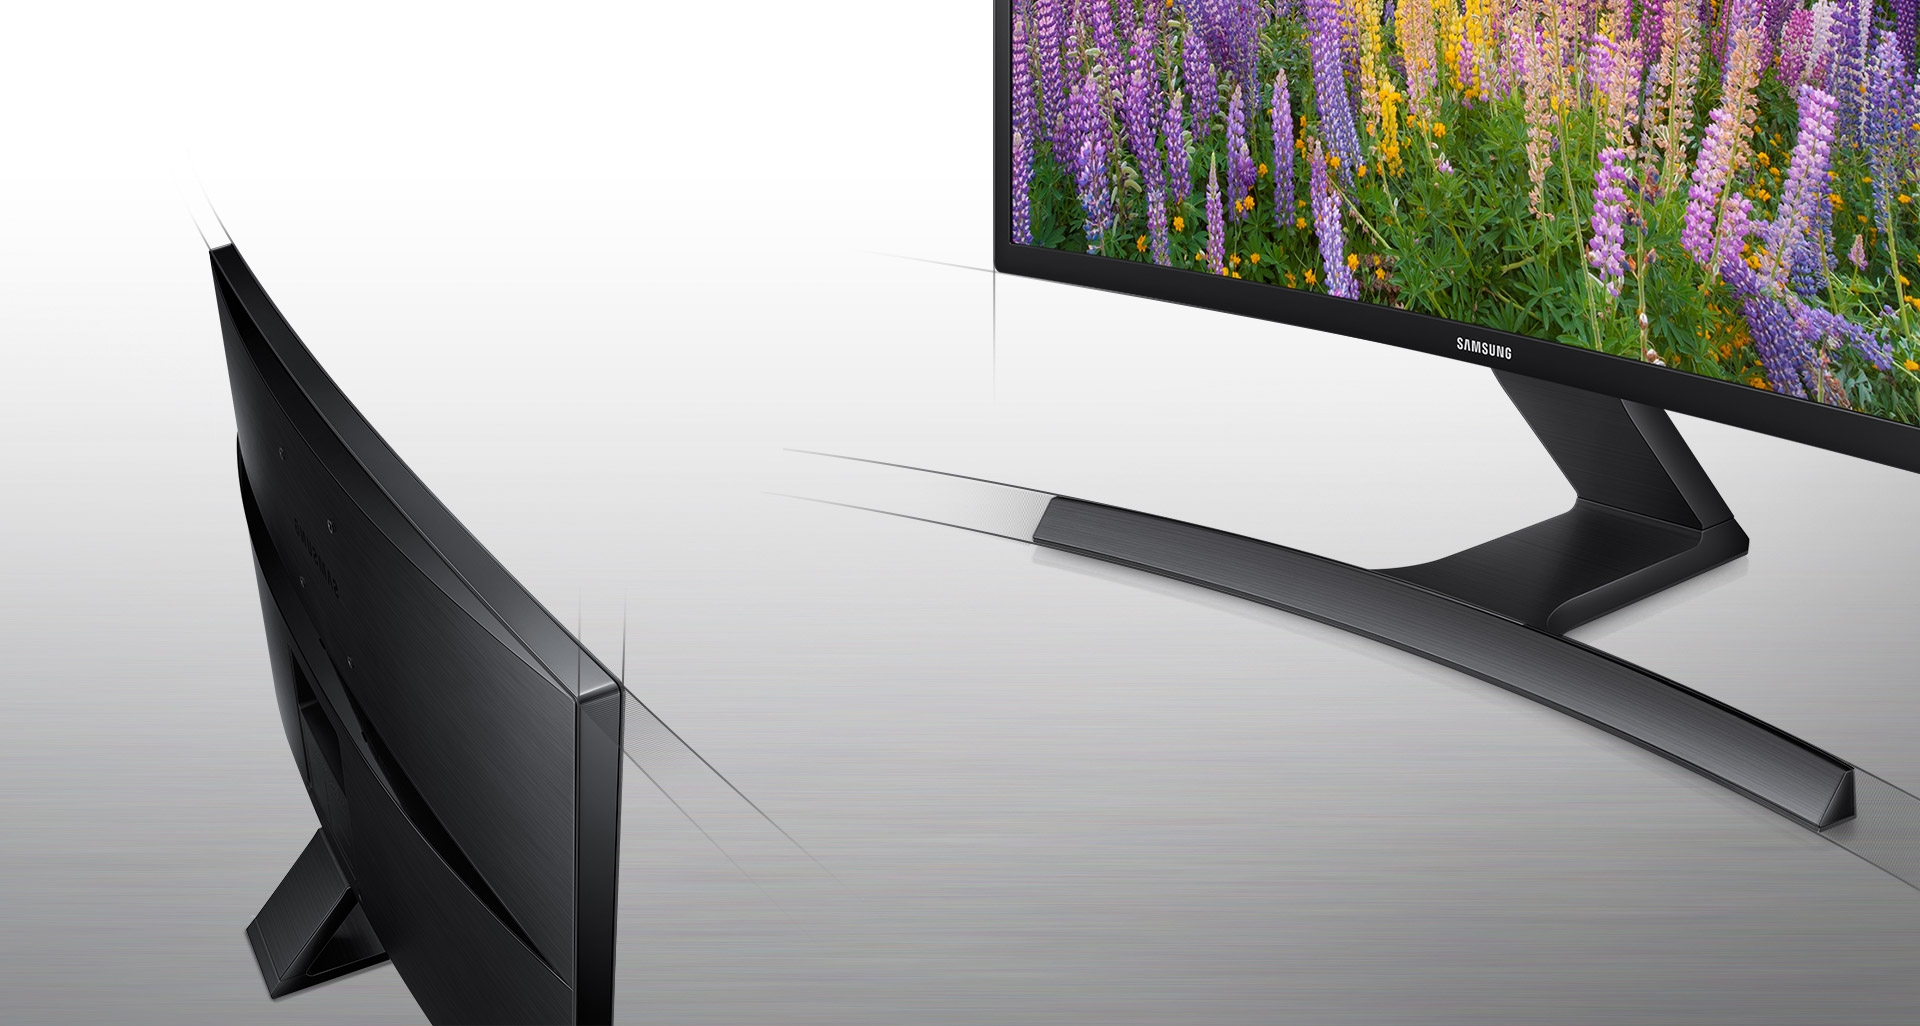 Sophisticated design in glossy black & T-shaped stand